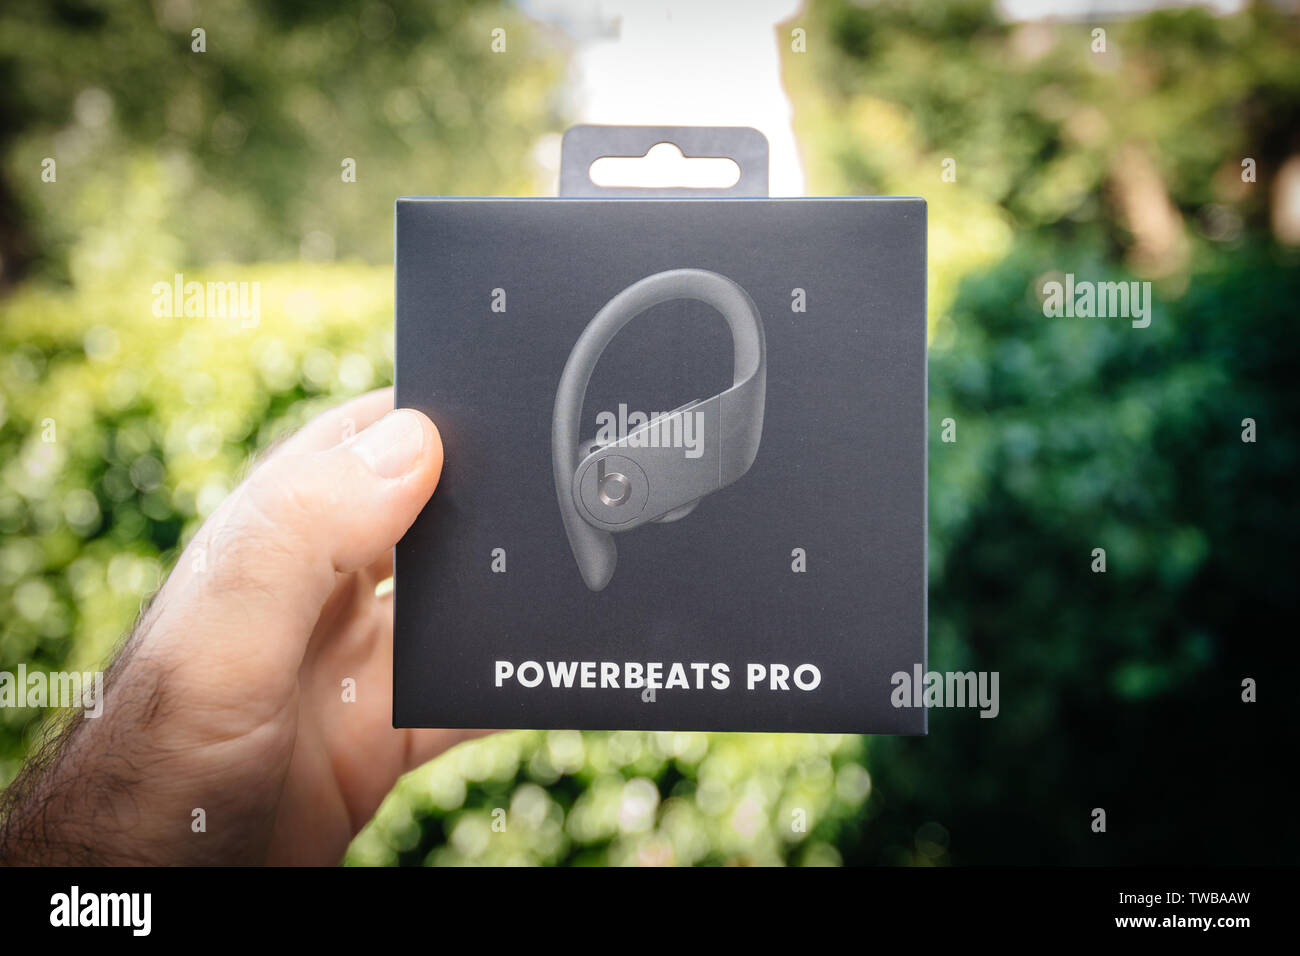 Paris, France - Jun 17, 2019: Man hand holding against green park background Powerbeats Pro Beats by Dr Dre wireless high-performance earphones waterproof and workout professional headphones Stock Photo